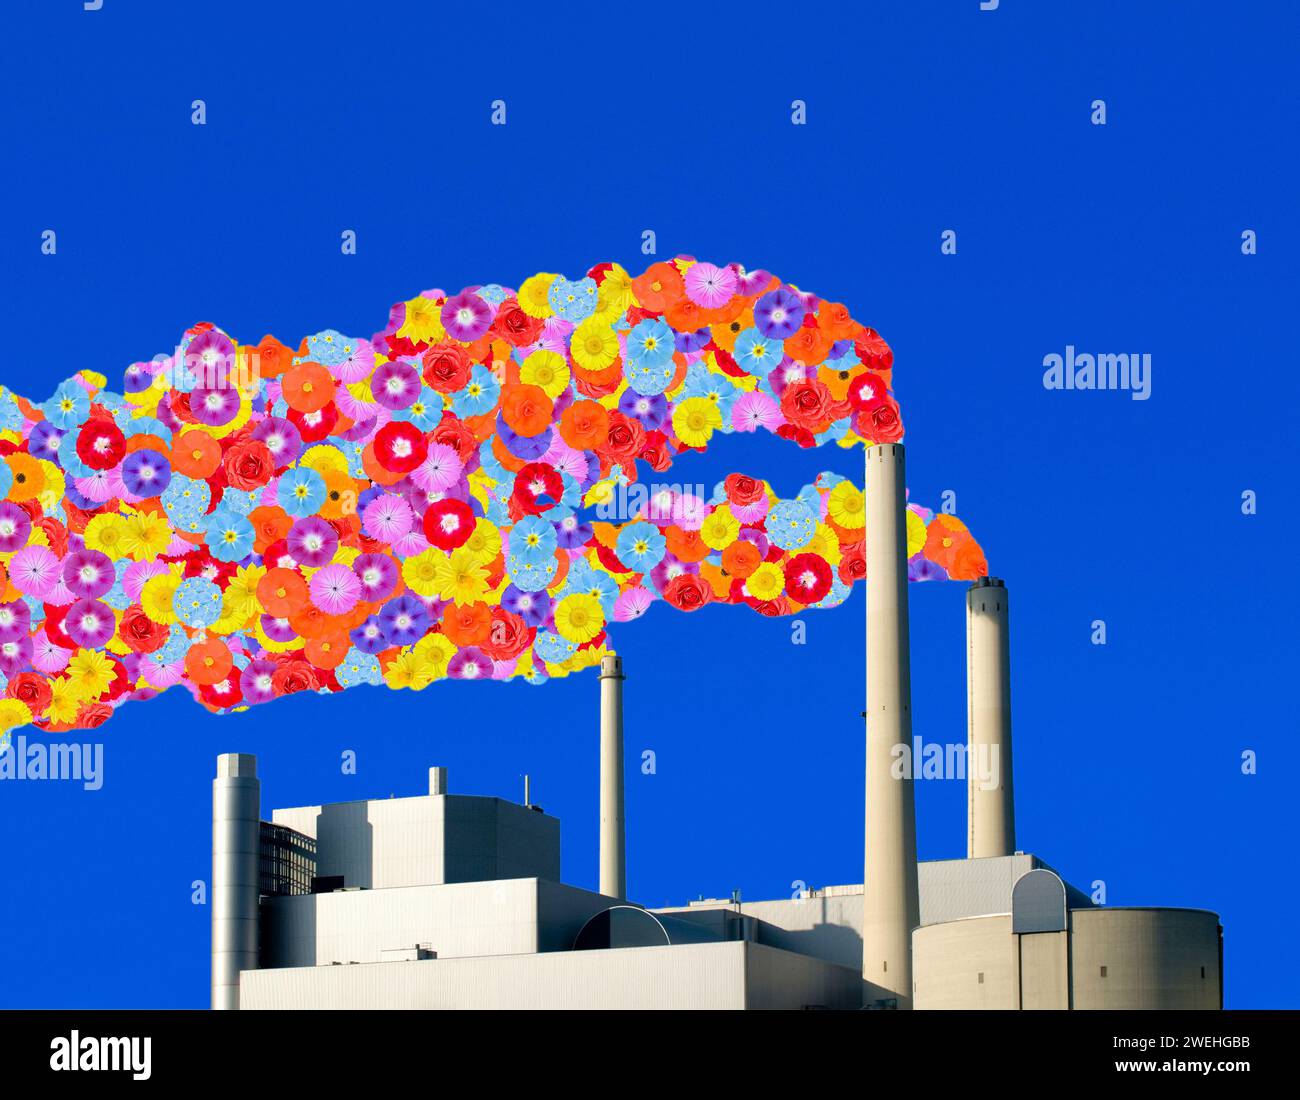 Smoking chimneys from the northern combined heat and power plant, waste to energy planr,  Munich, the smoke is symbolised by flowers for clean exhaust Stock Photo